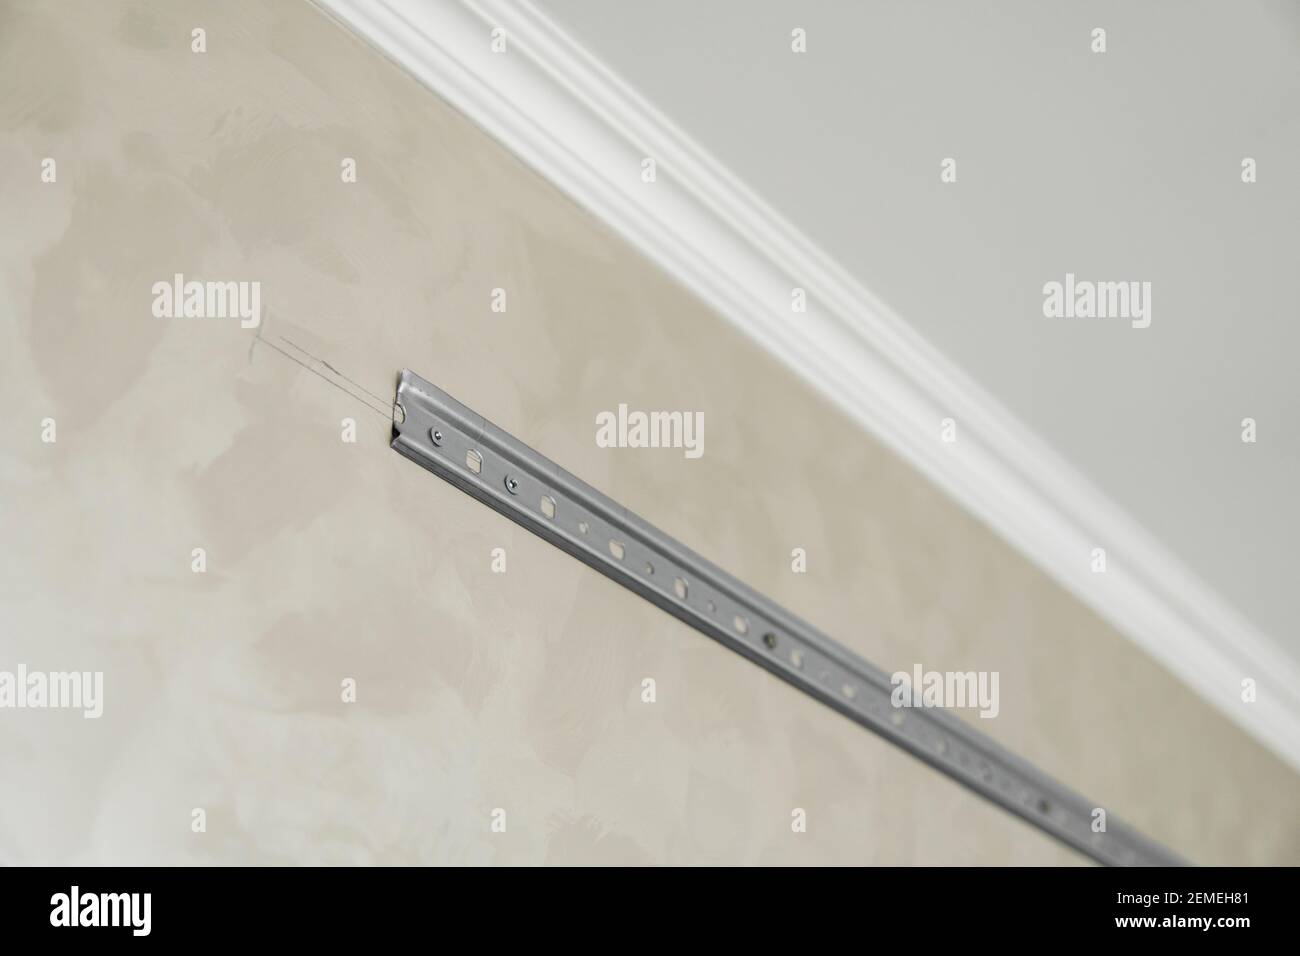 Close-up of stainless steel mounting rail for mounting kitchen cabinets on a wall. Stock Photo